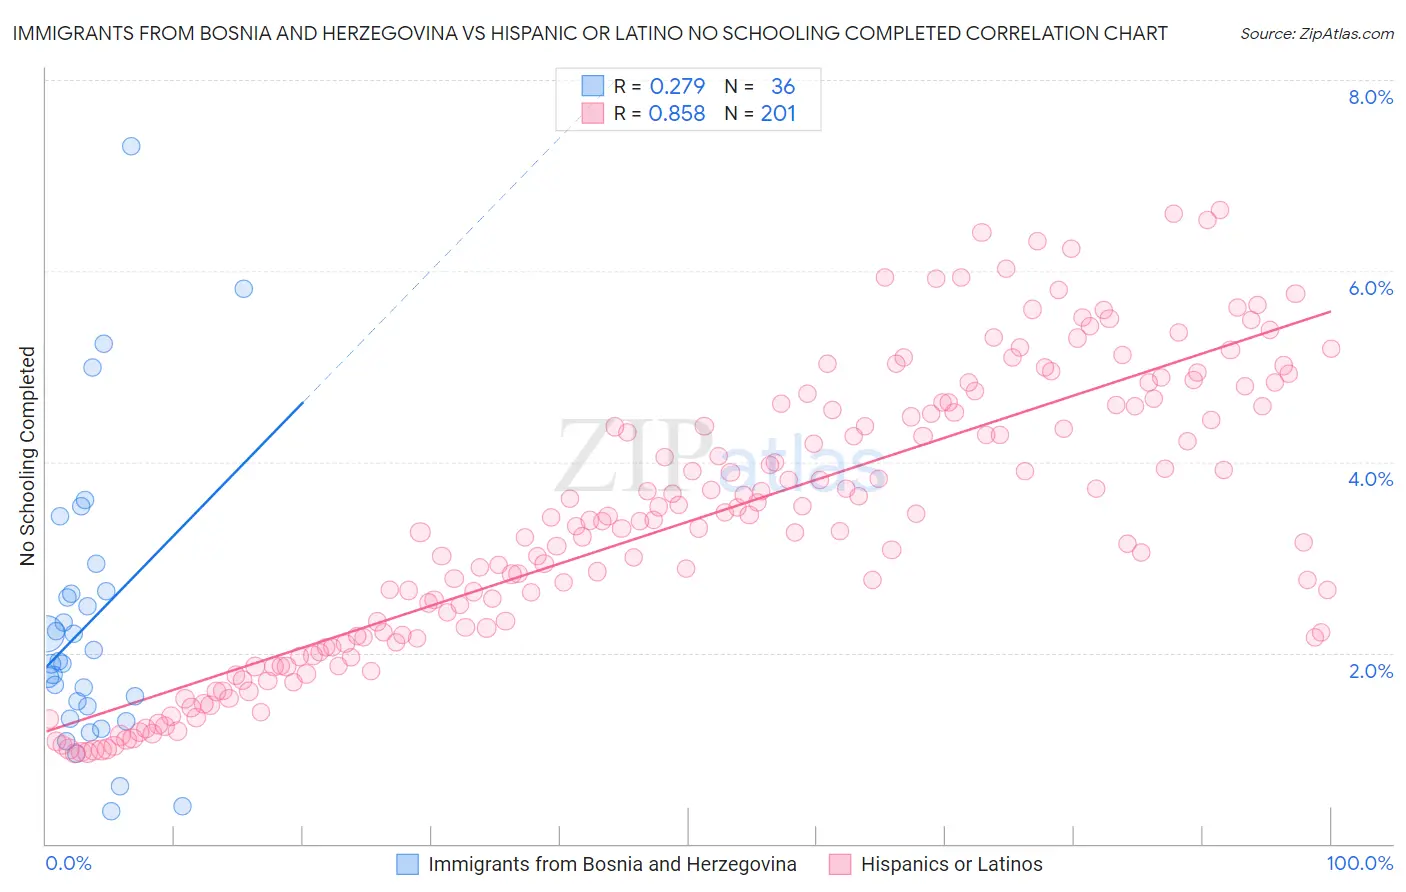 Immigrants from Bosnia and Herzegovina vs Hispanic or Latino No Schooling Completed